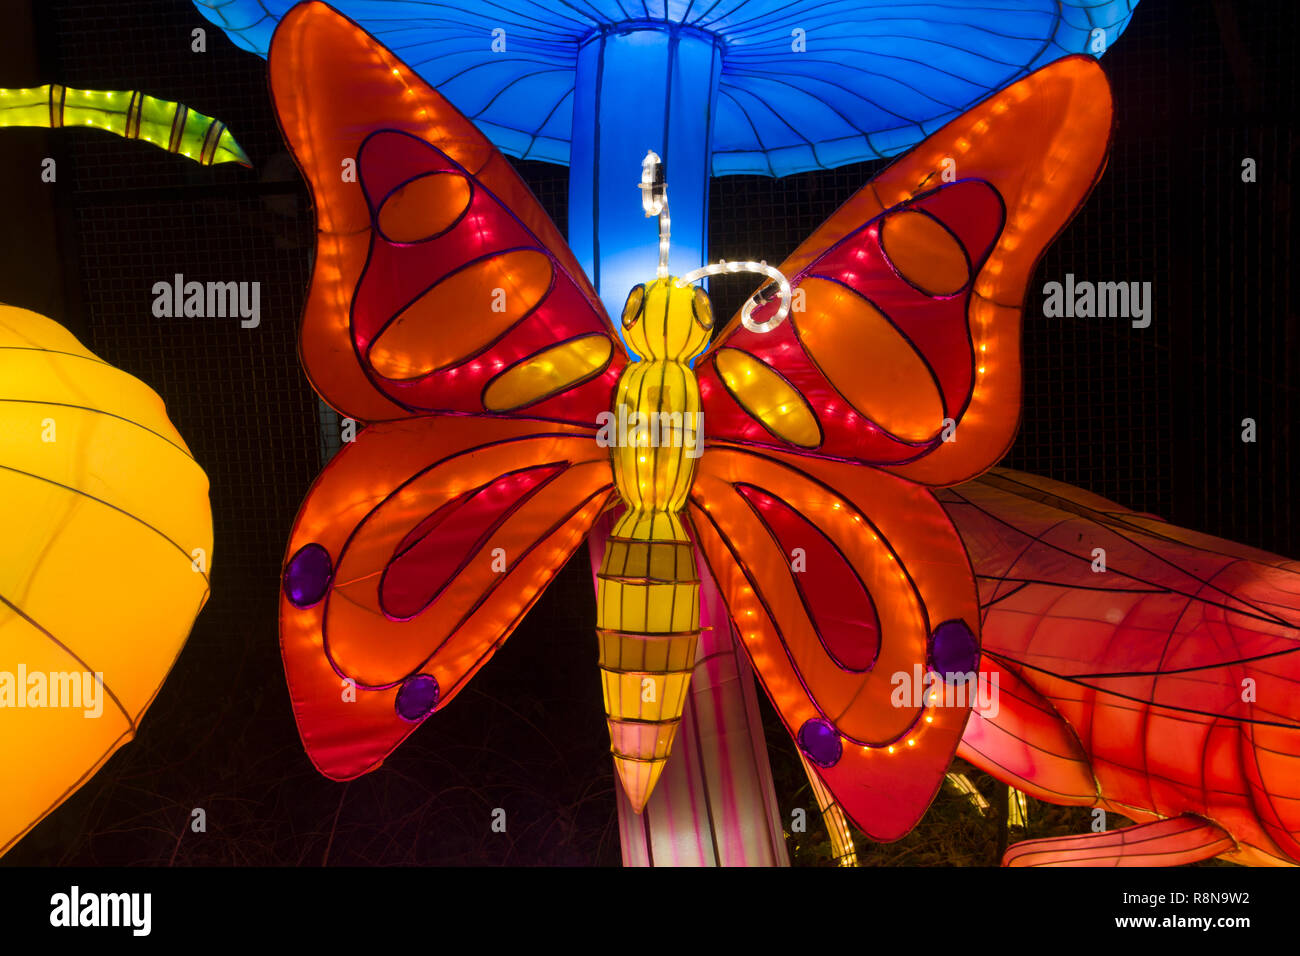 Chinese butterfly paper sculpture shining in the dark at a Asian lantern festival Stock Photo